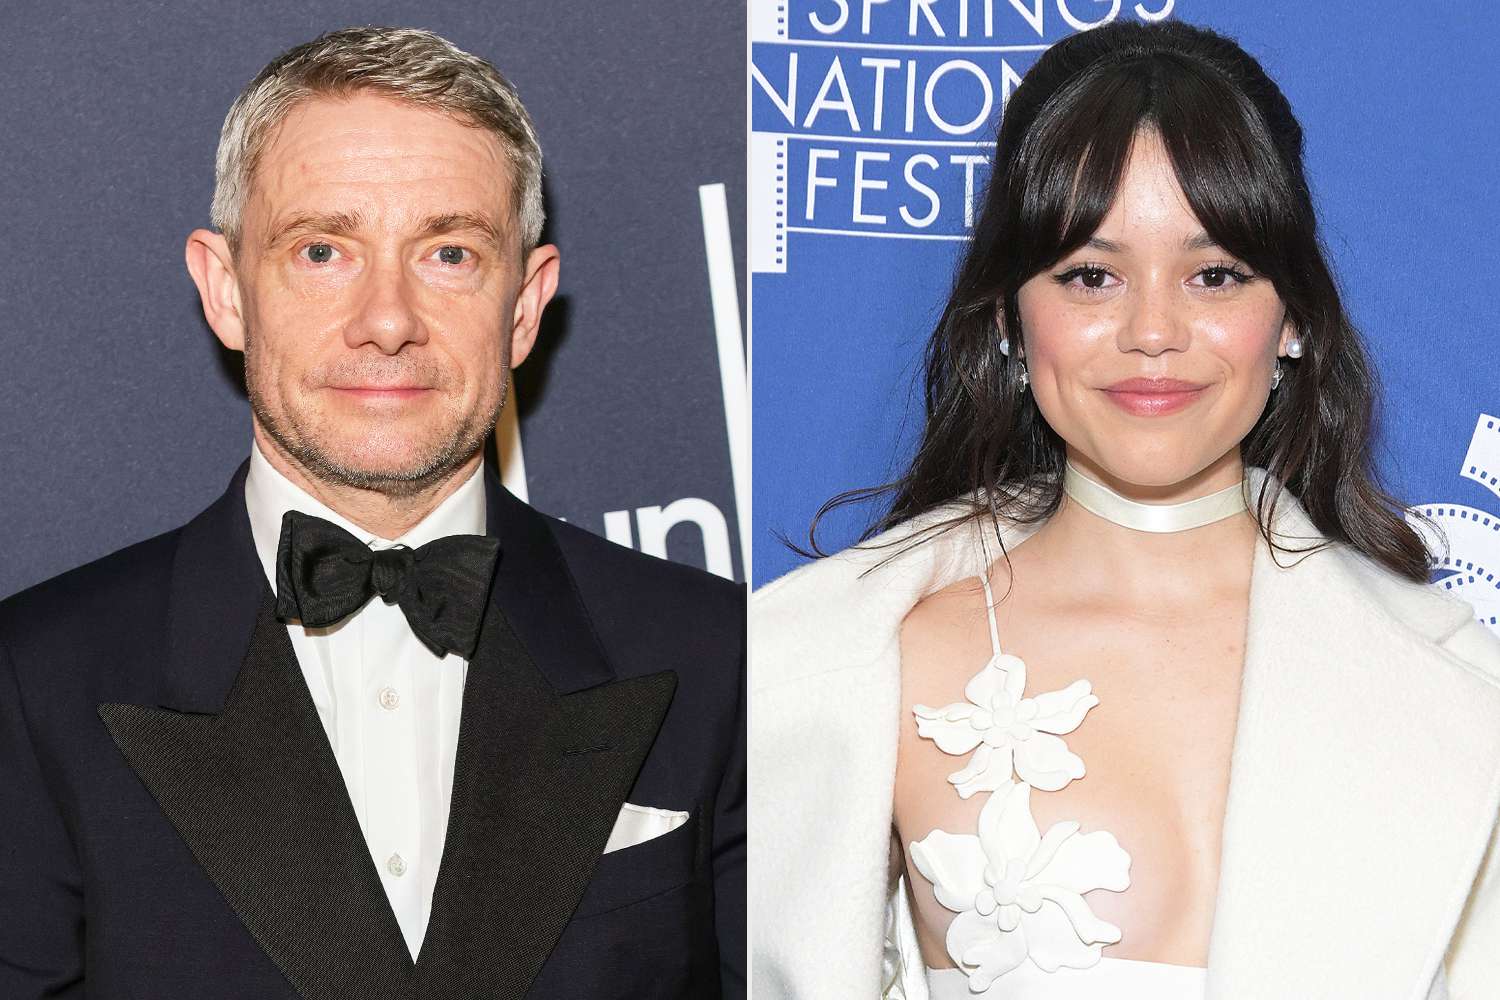 Martin Freeman Reacts to Backlash Over Age Gap with Jenna Ortega in “Miller's Girl”: 'That's a Shame'